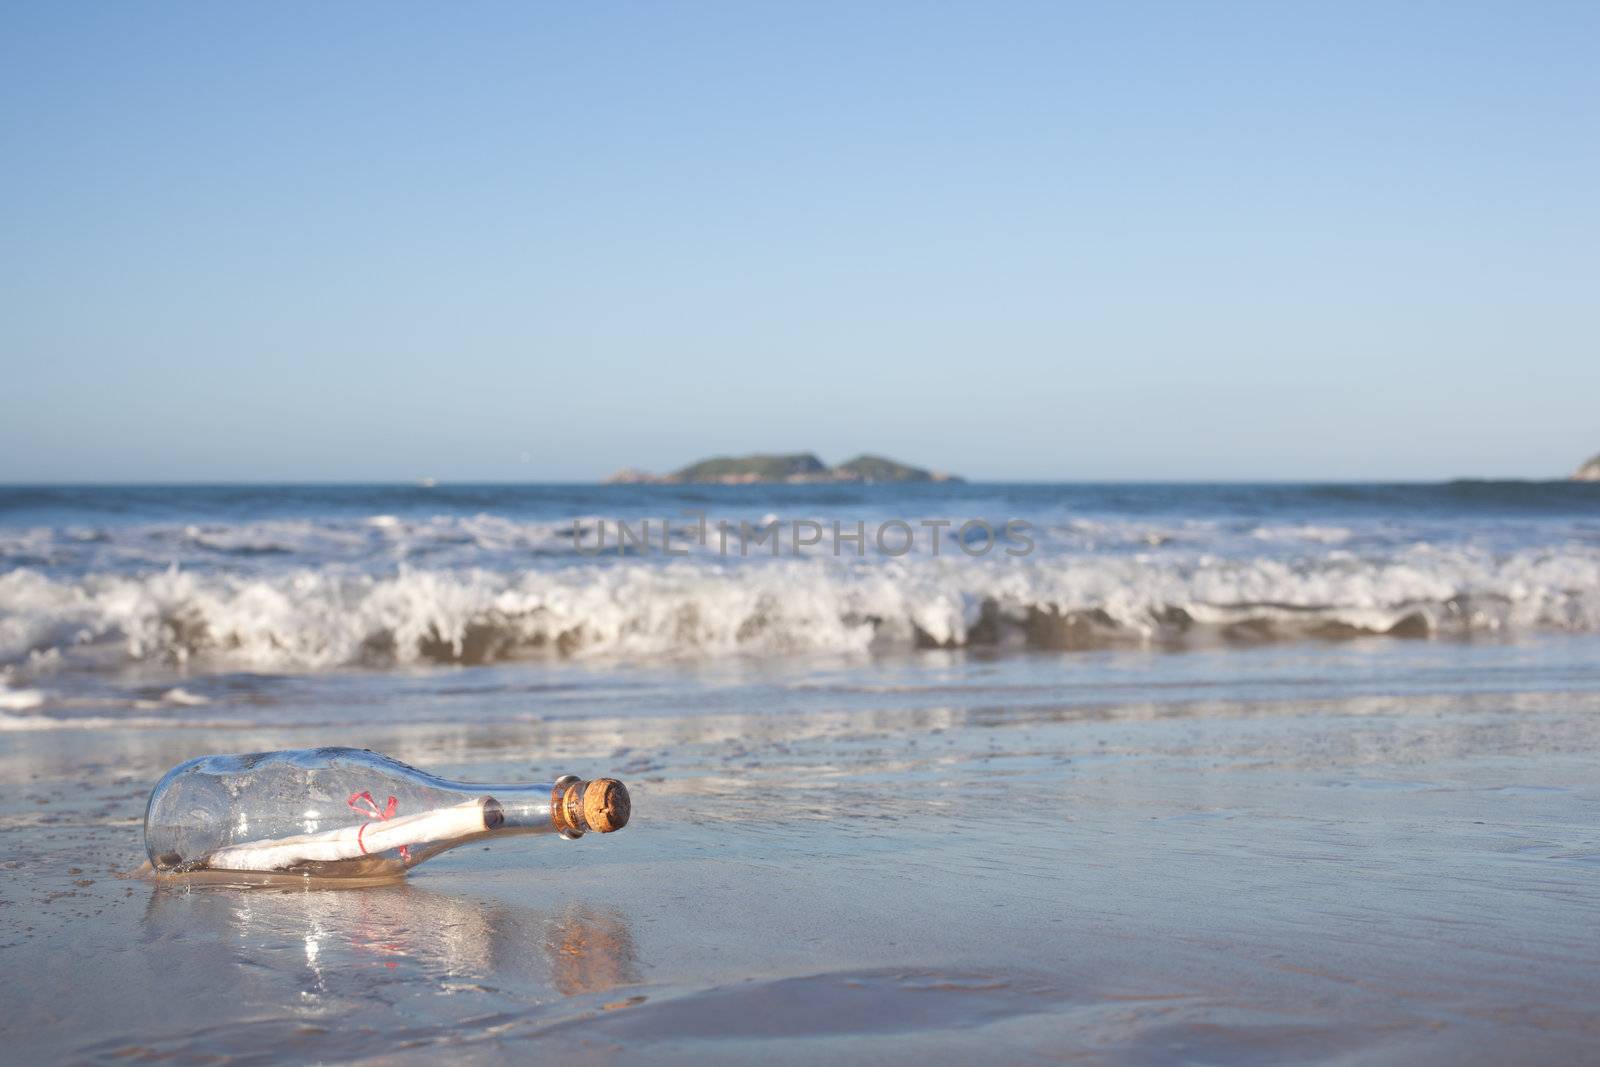 A message inside a glass bottle, washed up on a remote beach.